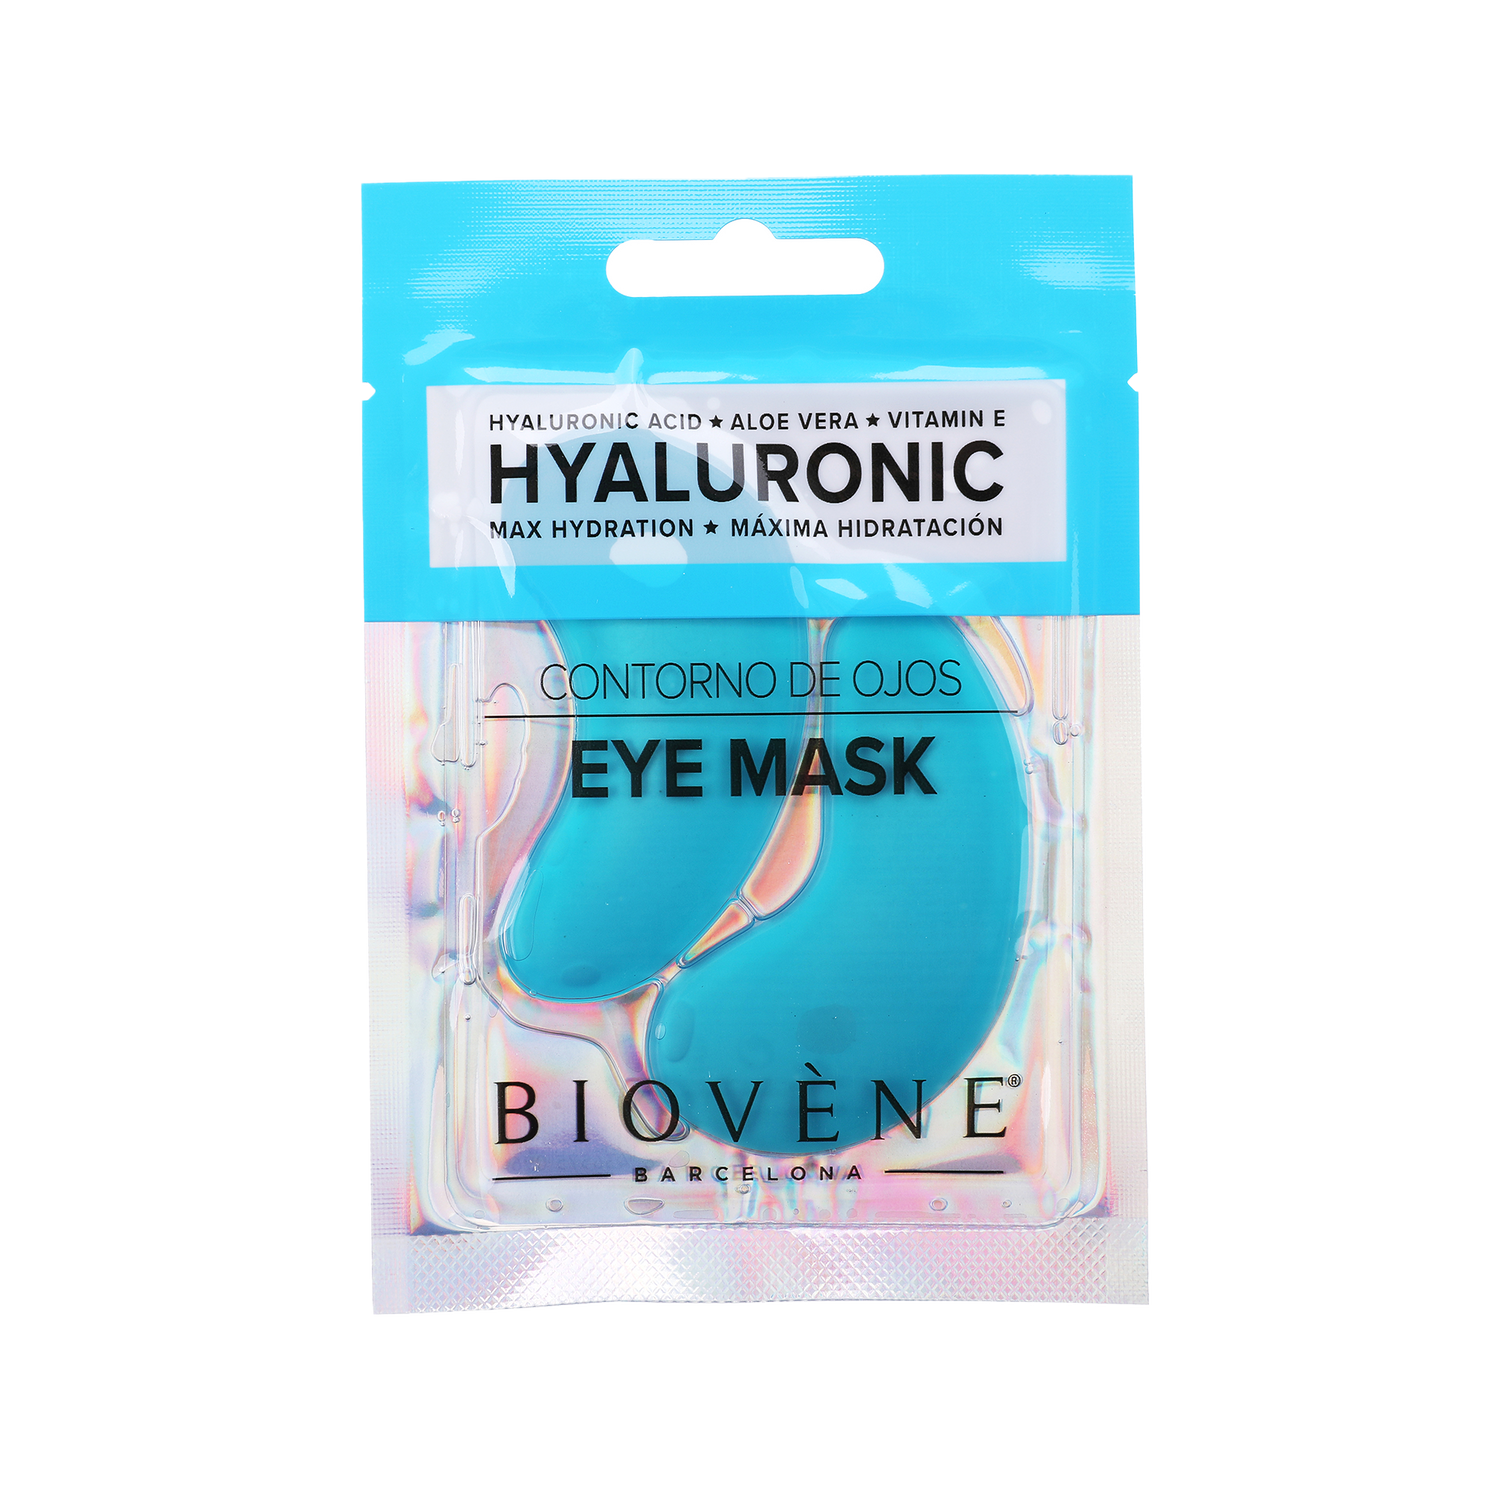 HYALURONIC ACID Max-Hydration Eye Pad Mask with Aloe Vera and Vitamin E